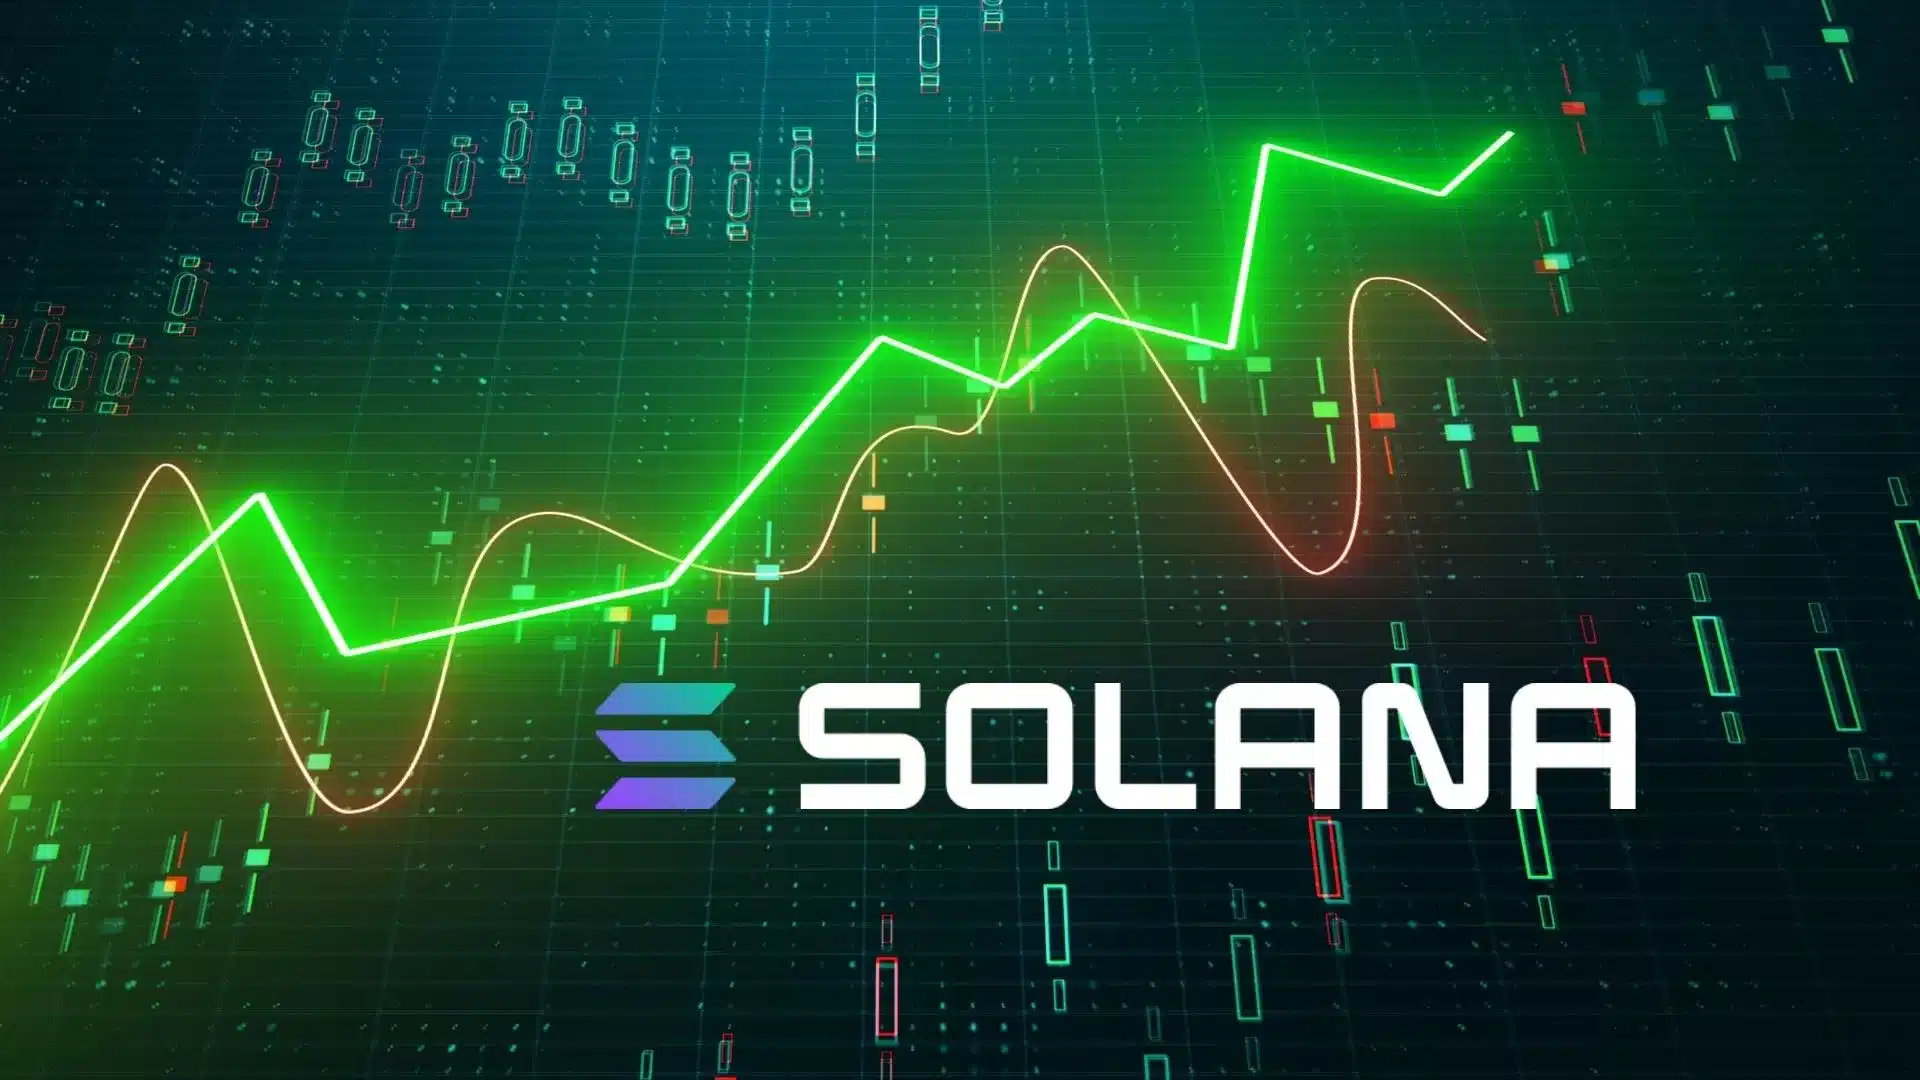 Price of Solana Reaches $170 With a 21% Weekly Gain, Is $180 Possible Over the Weekend?